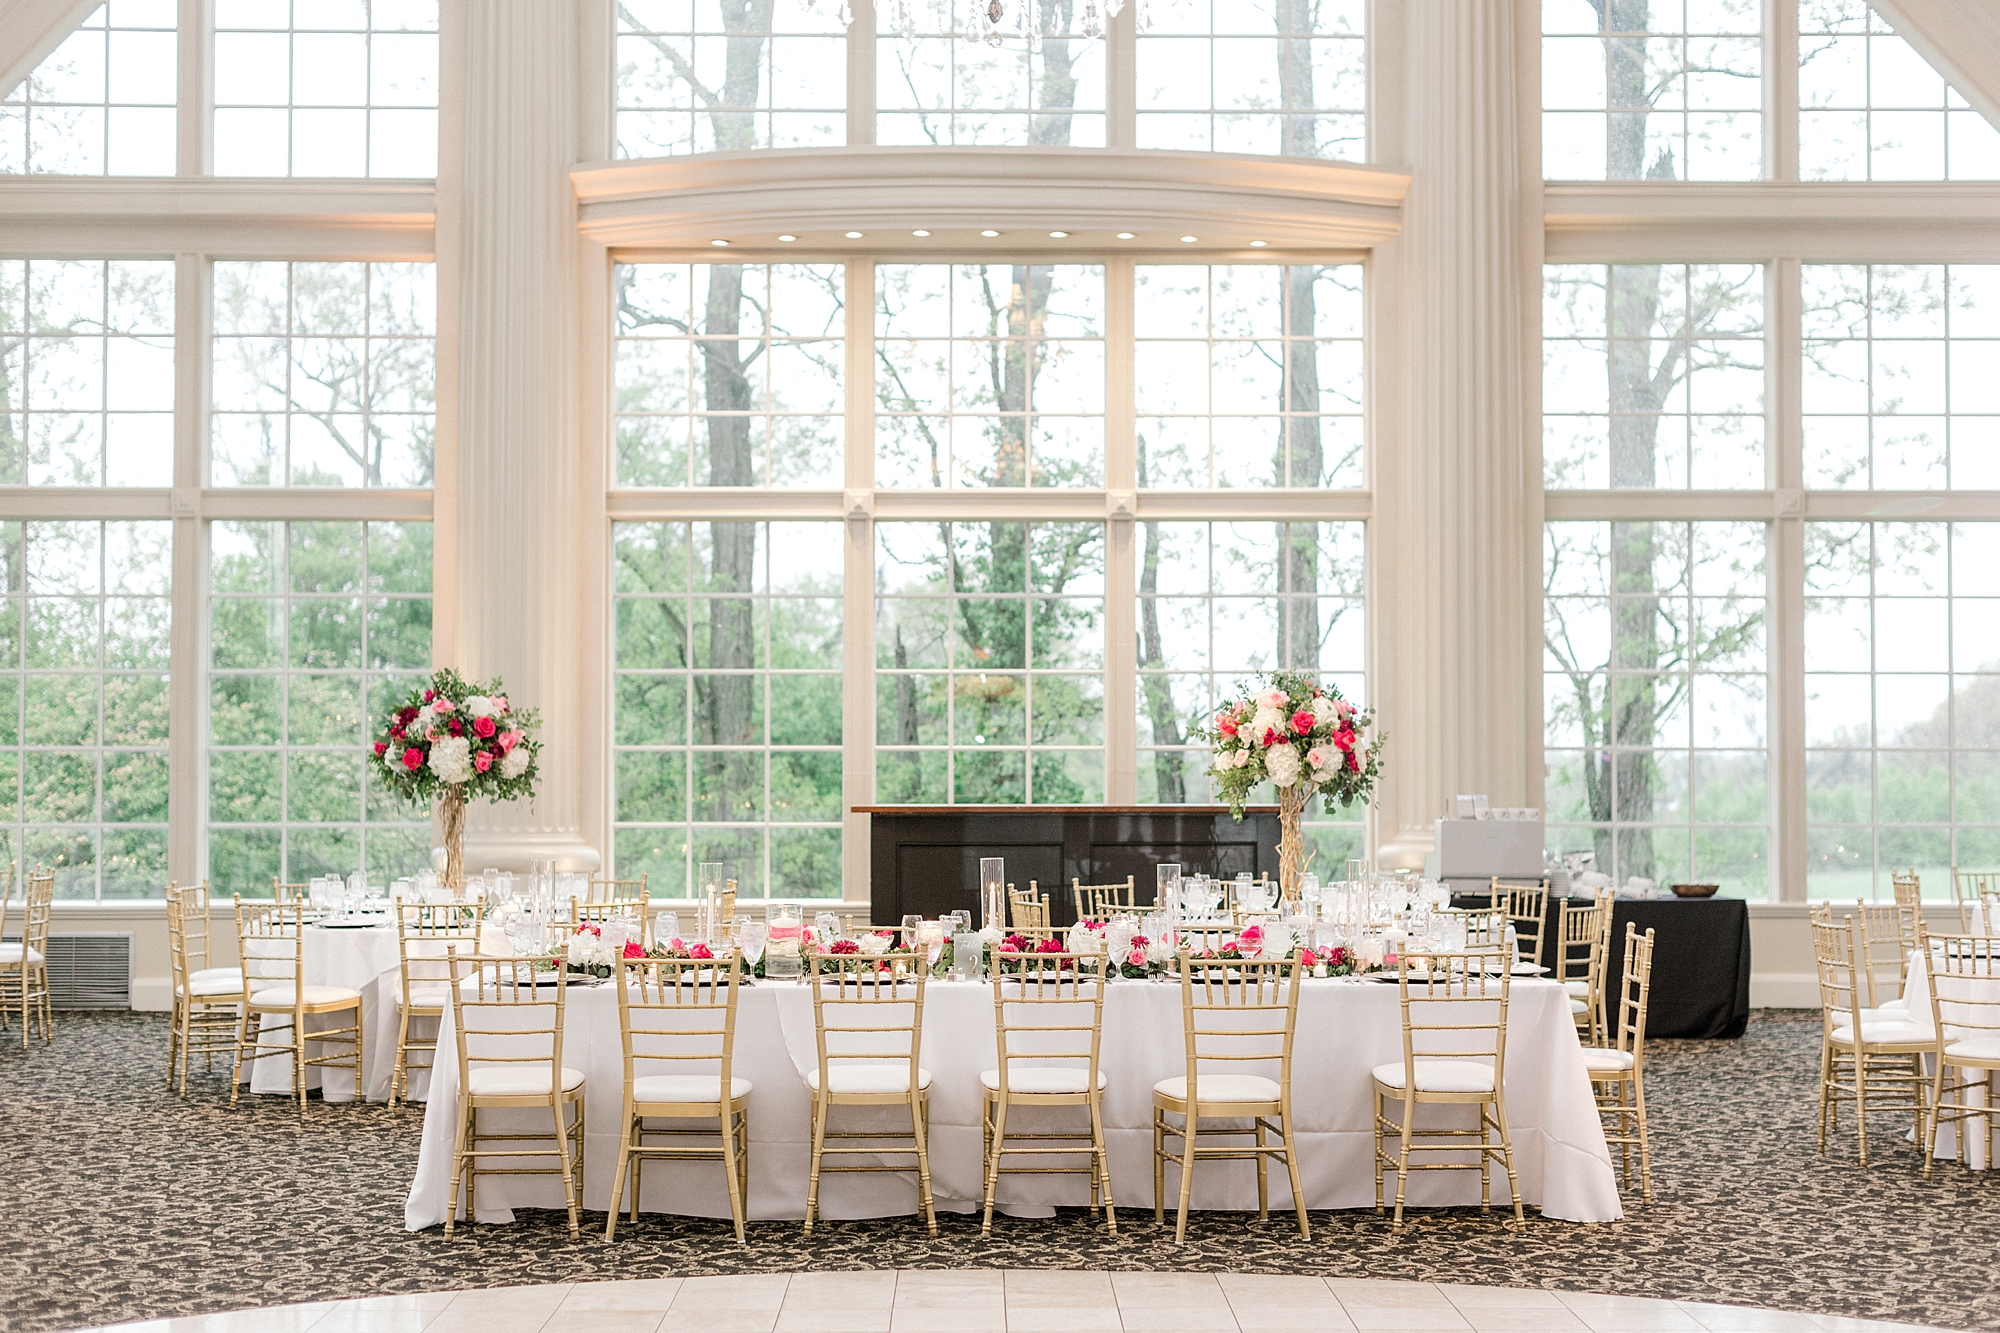 The Ashford Estate wedding reception table with pink floral centerpieces